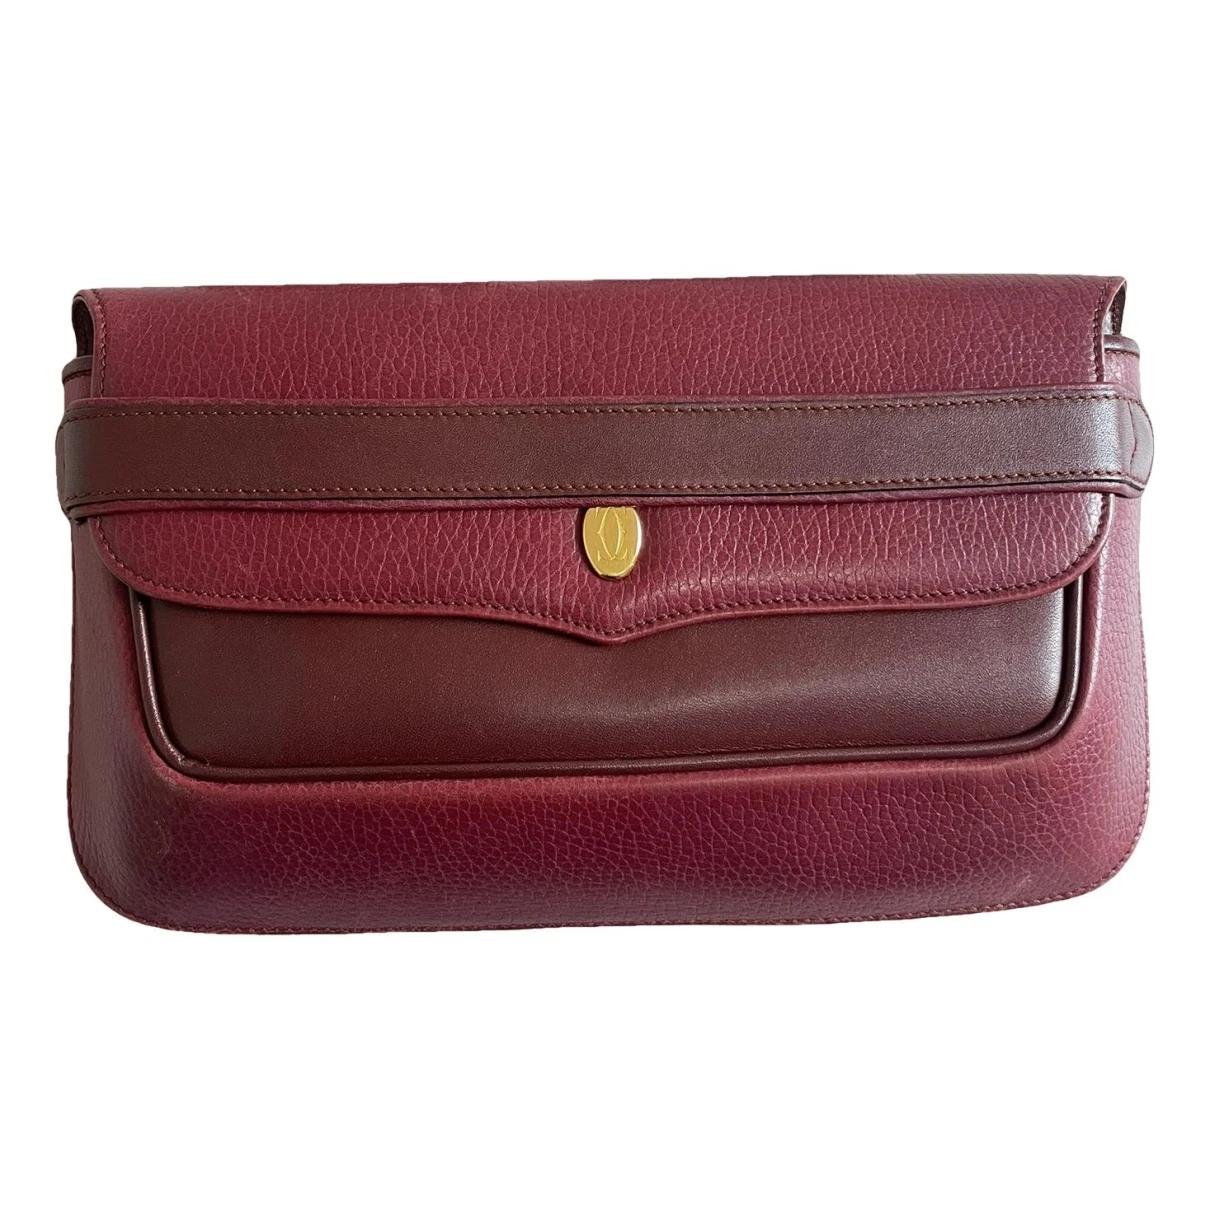 Pre-owned Cartier Leather Clutch Bag In Red